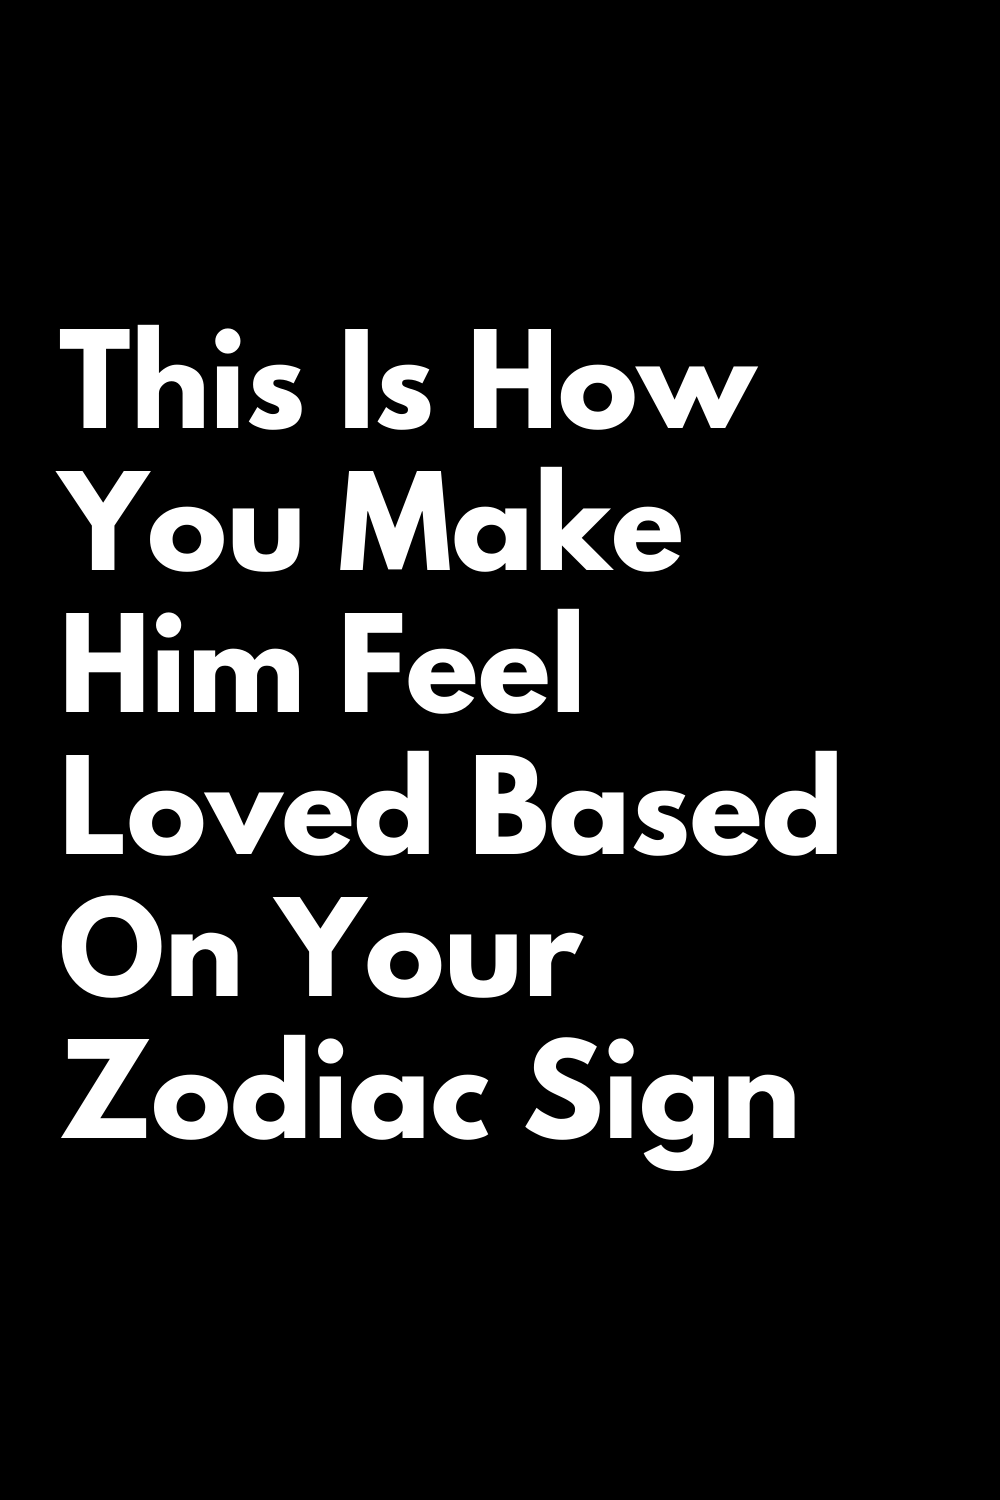 This Is How You Make Him Feel Loved Based On Your Zodiac Sign – Zodiac ...